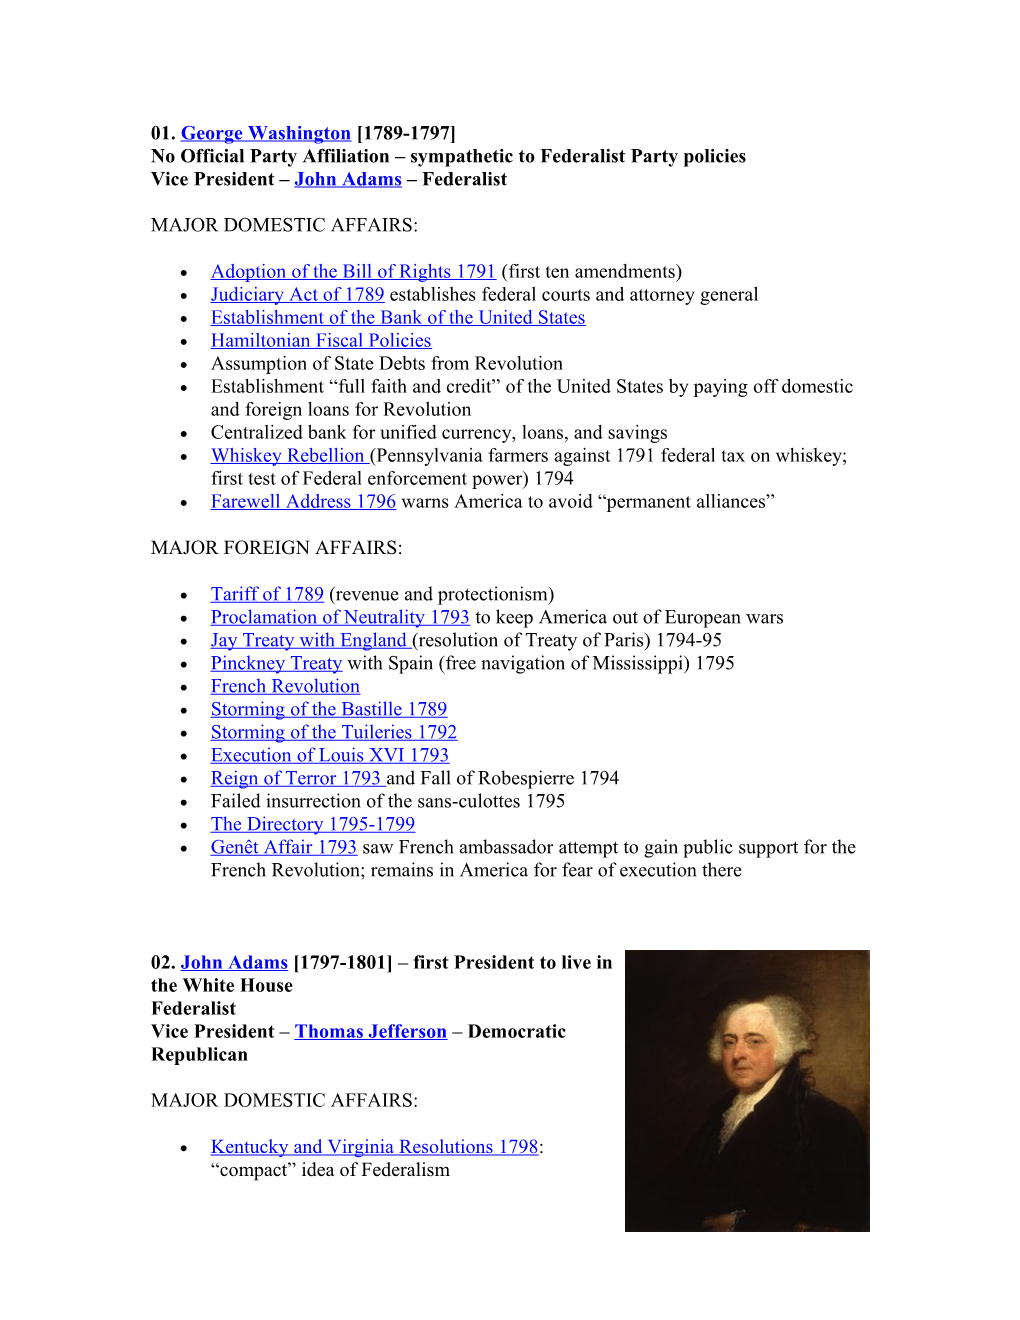 01. George Washington 1789-1797 No Official Party Affiliation Sympathetic to Federalist